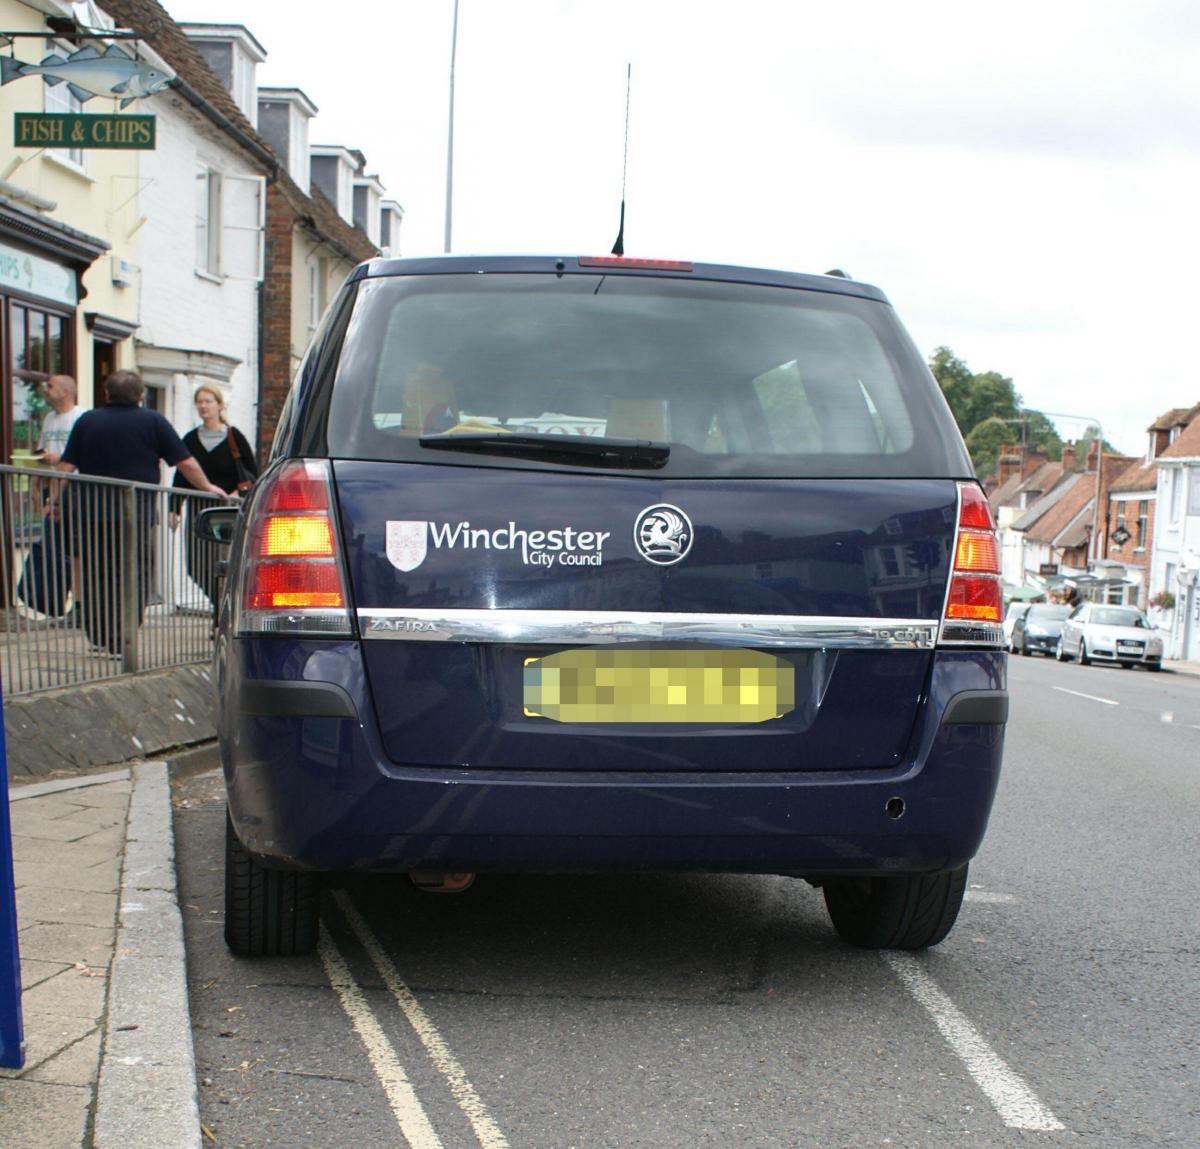 Winchester City Council Parking attendant's van parked on double yellow lines